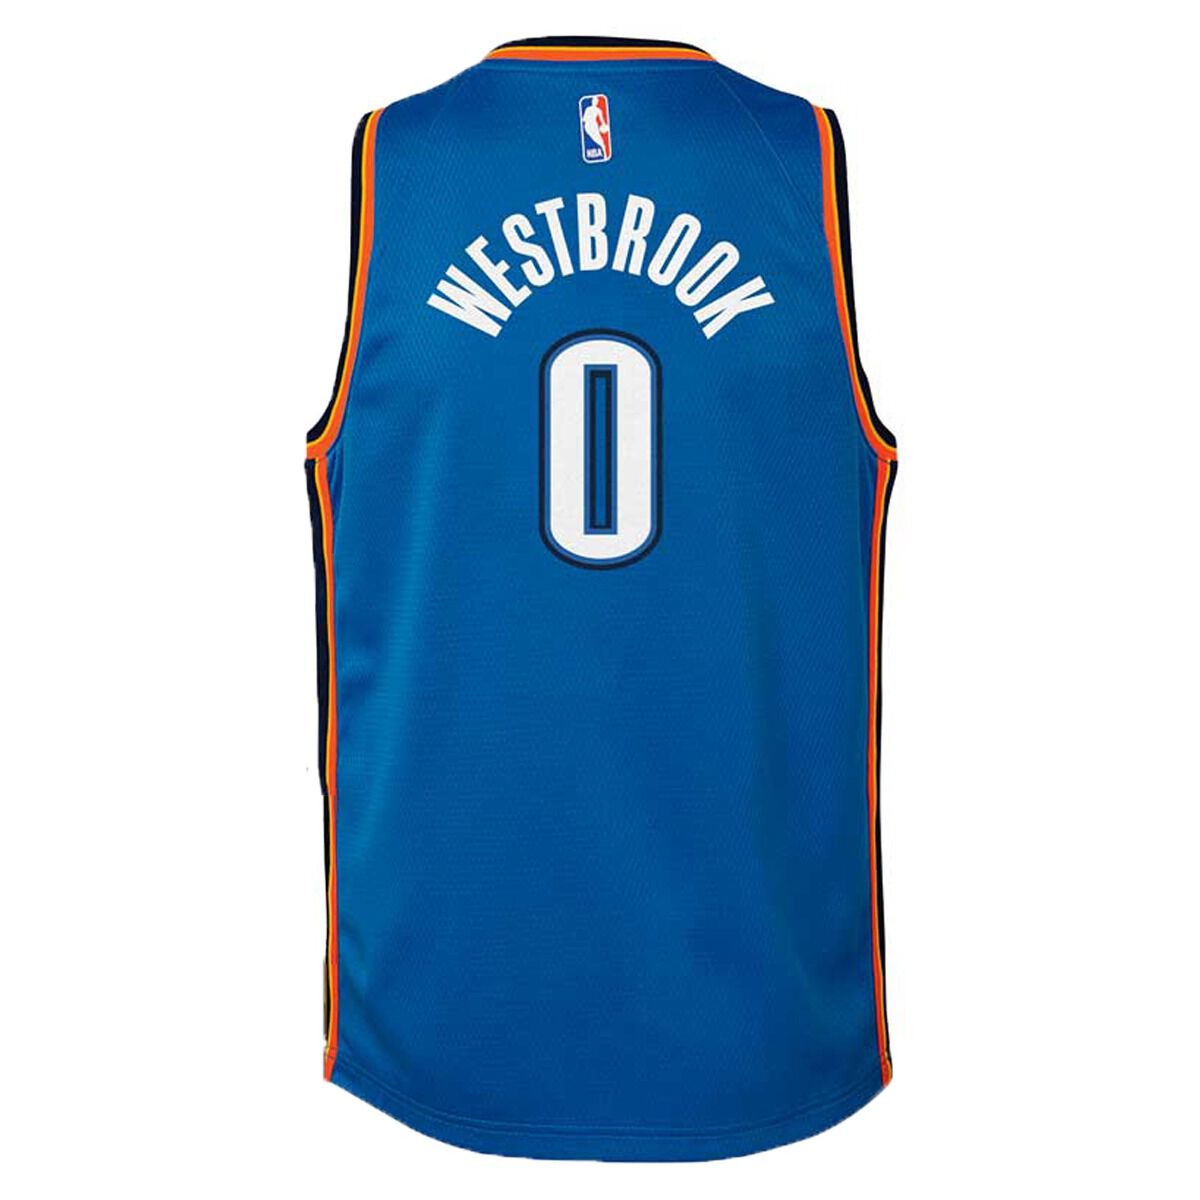 westbrook signed jersey